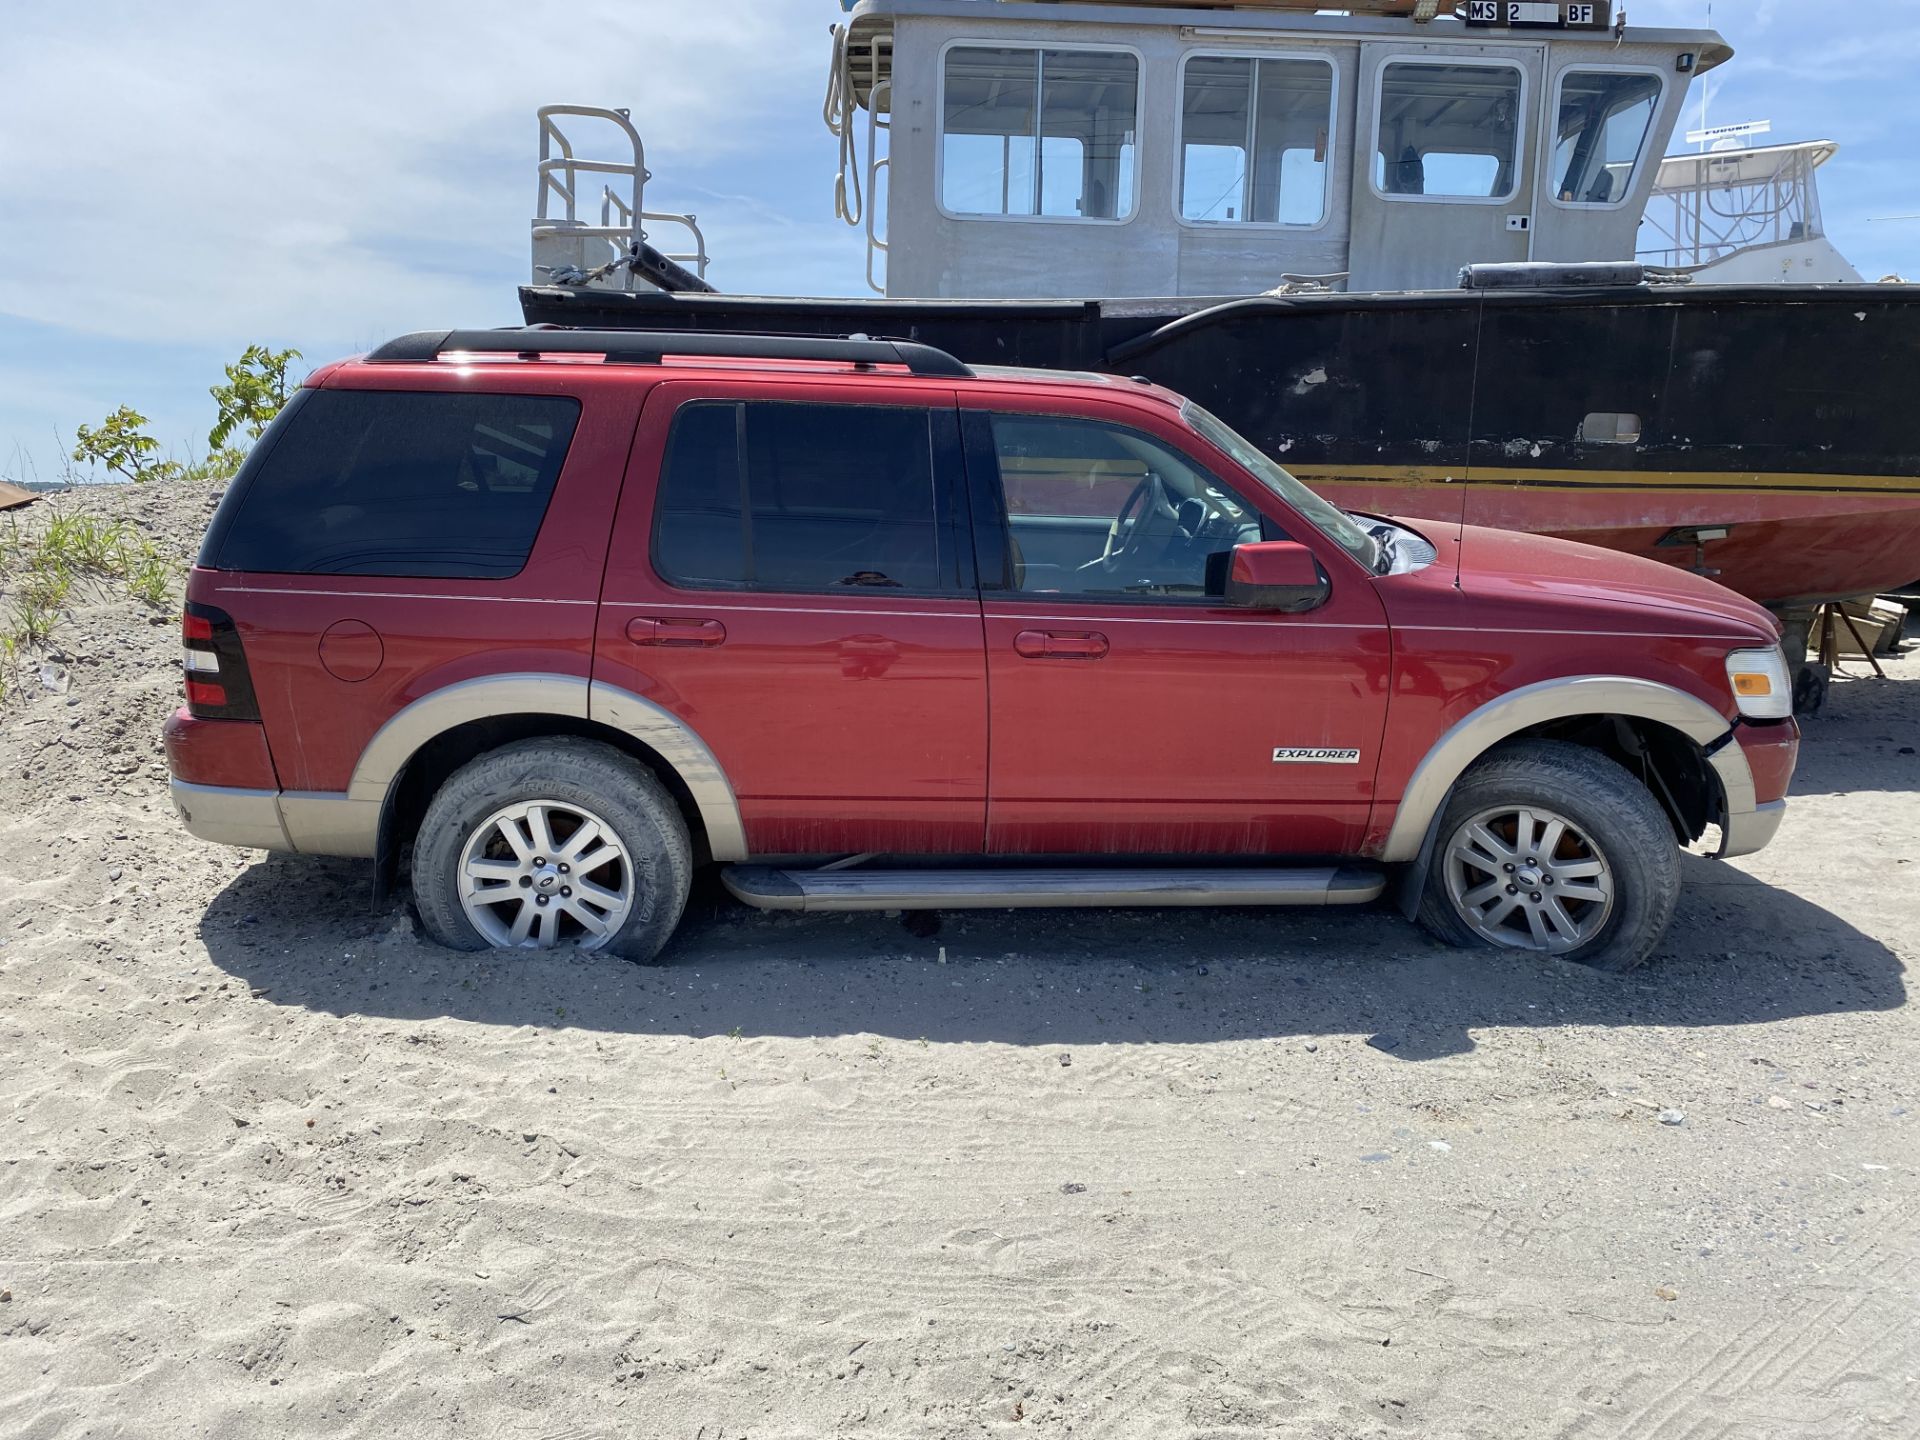 2008 Ford Explorer Eddie Bauer Edition, 4 x 4, Leather, Glass Roof, Ocean Salvage Vehicle w/ - Image 2 of 2